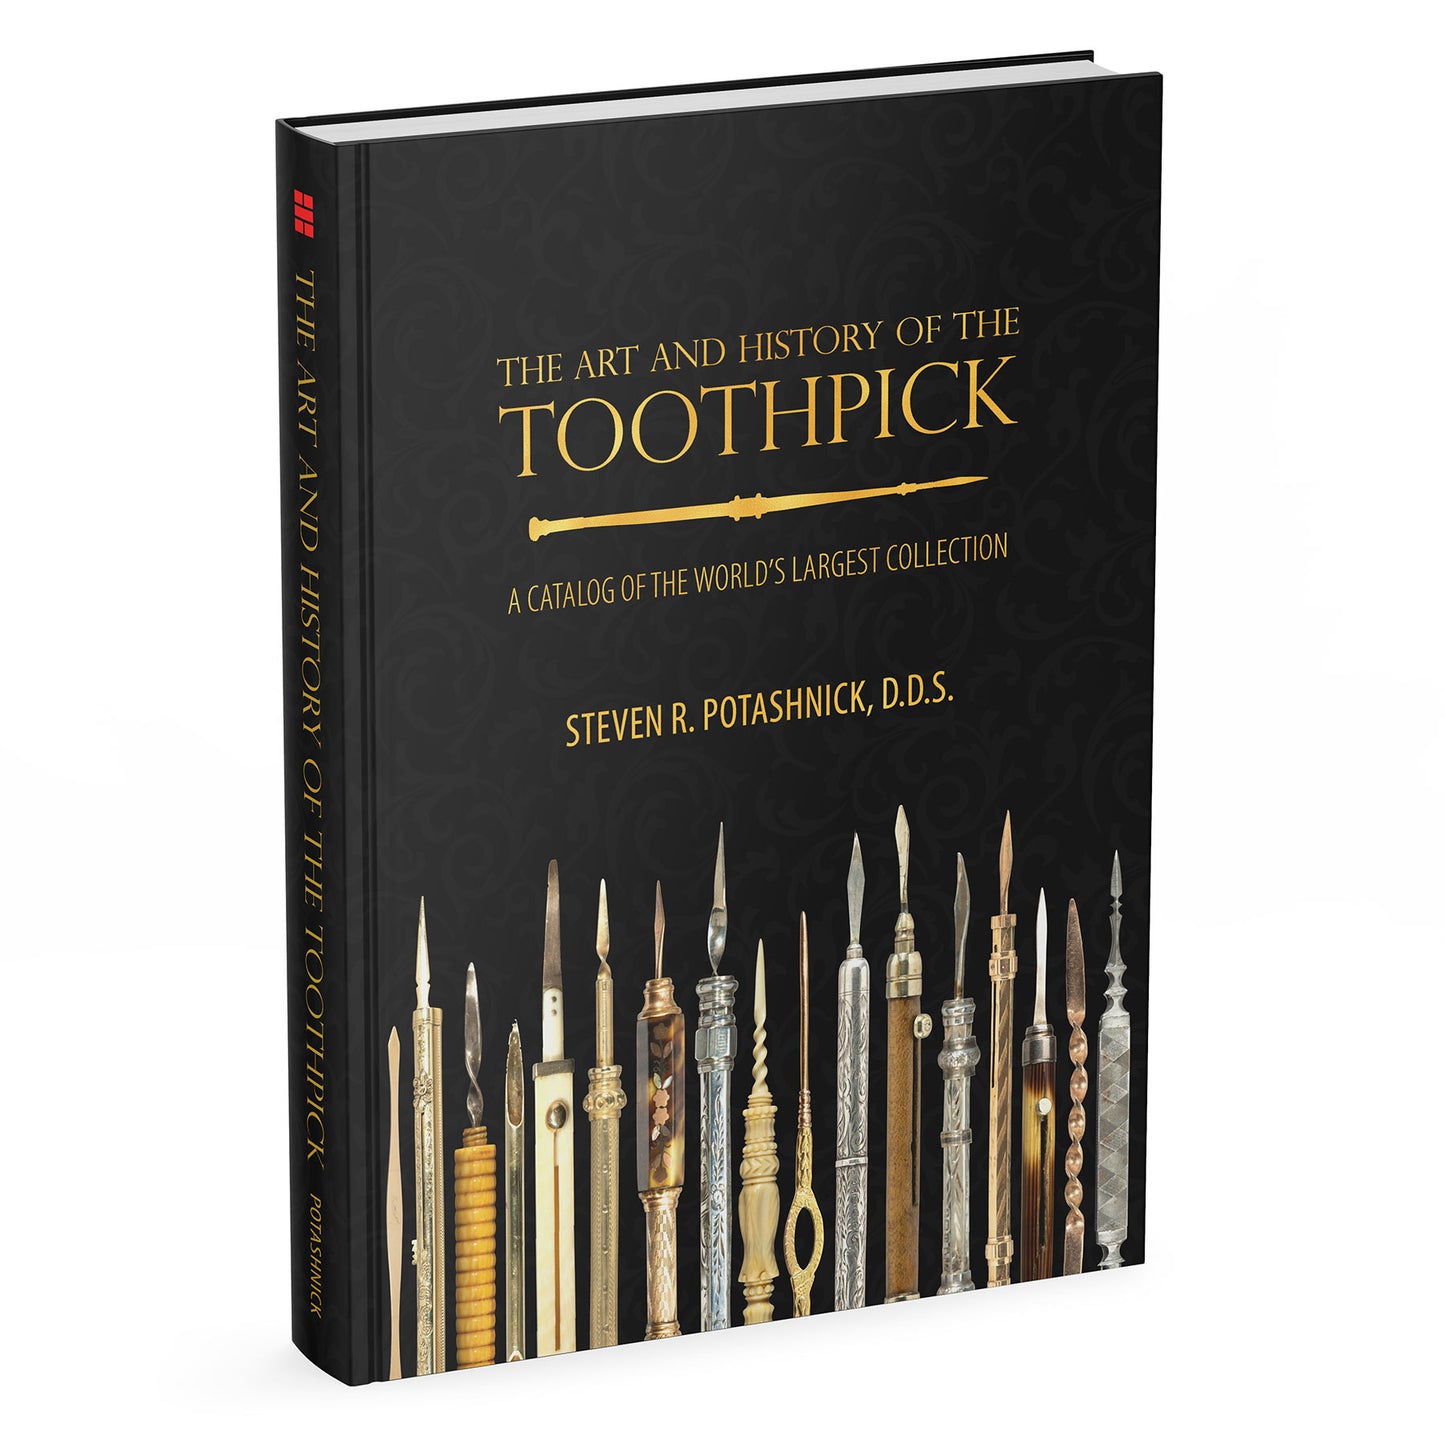 The Art and History of the Toothpick